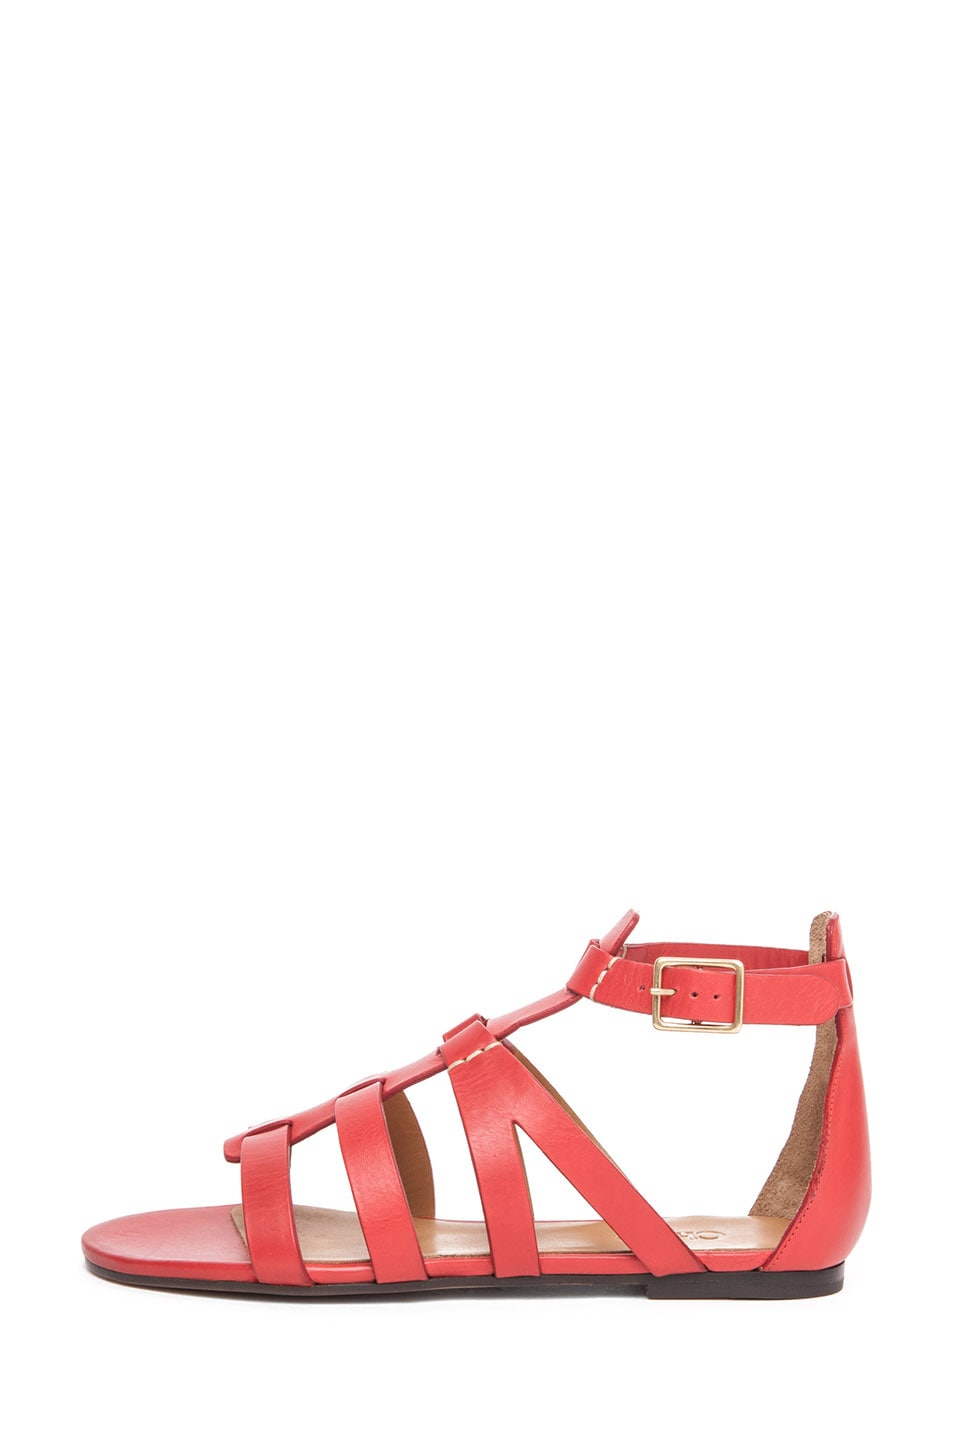 Image 1 of Chloe Leather Gladiator Sandals in Fiamma